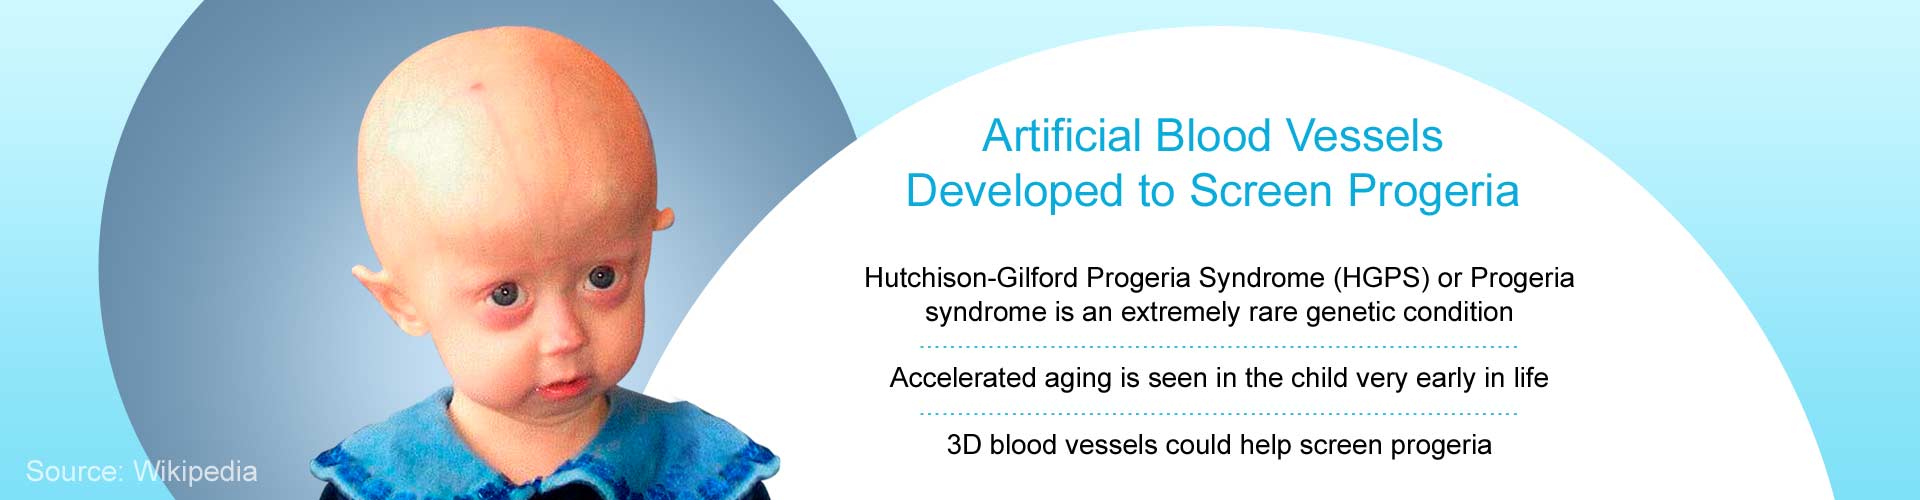 Artifical blood vessels developed to screen progeria
- Hutchison-Gilford progeria Syndrome (HGPS) or Progeria syndrome is an extremely rare genetic condition
- accelerated aging is seen in the child very early in life
- 3D blood vessels could help screen progeria